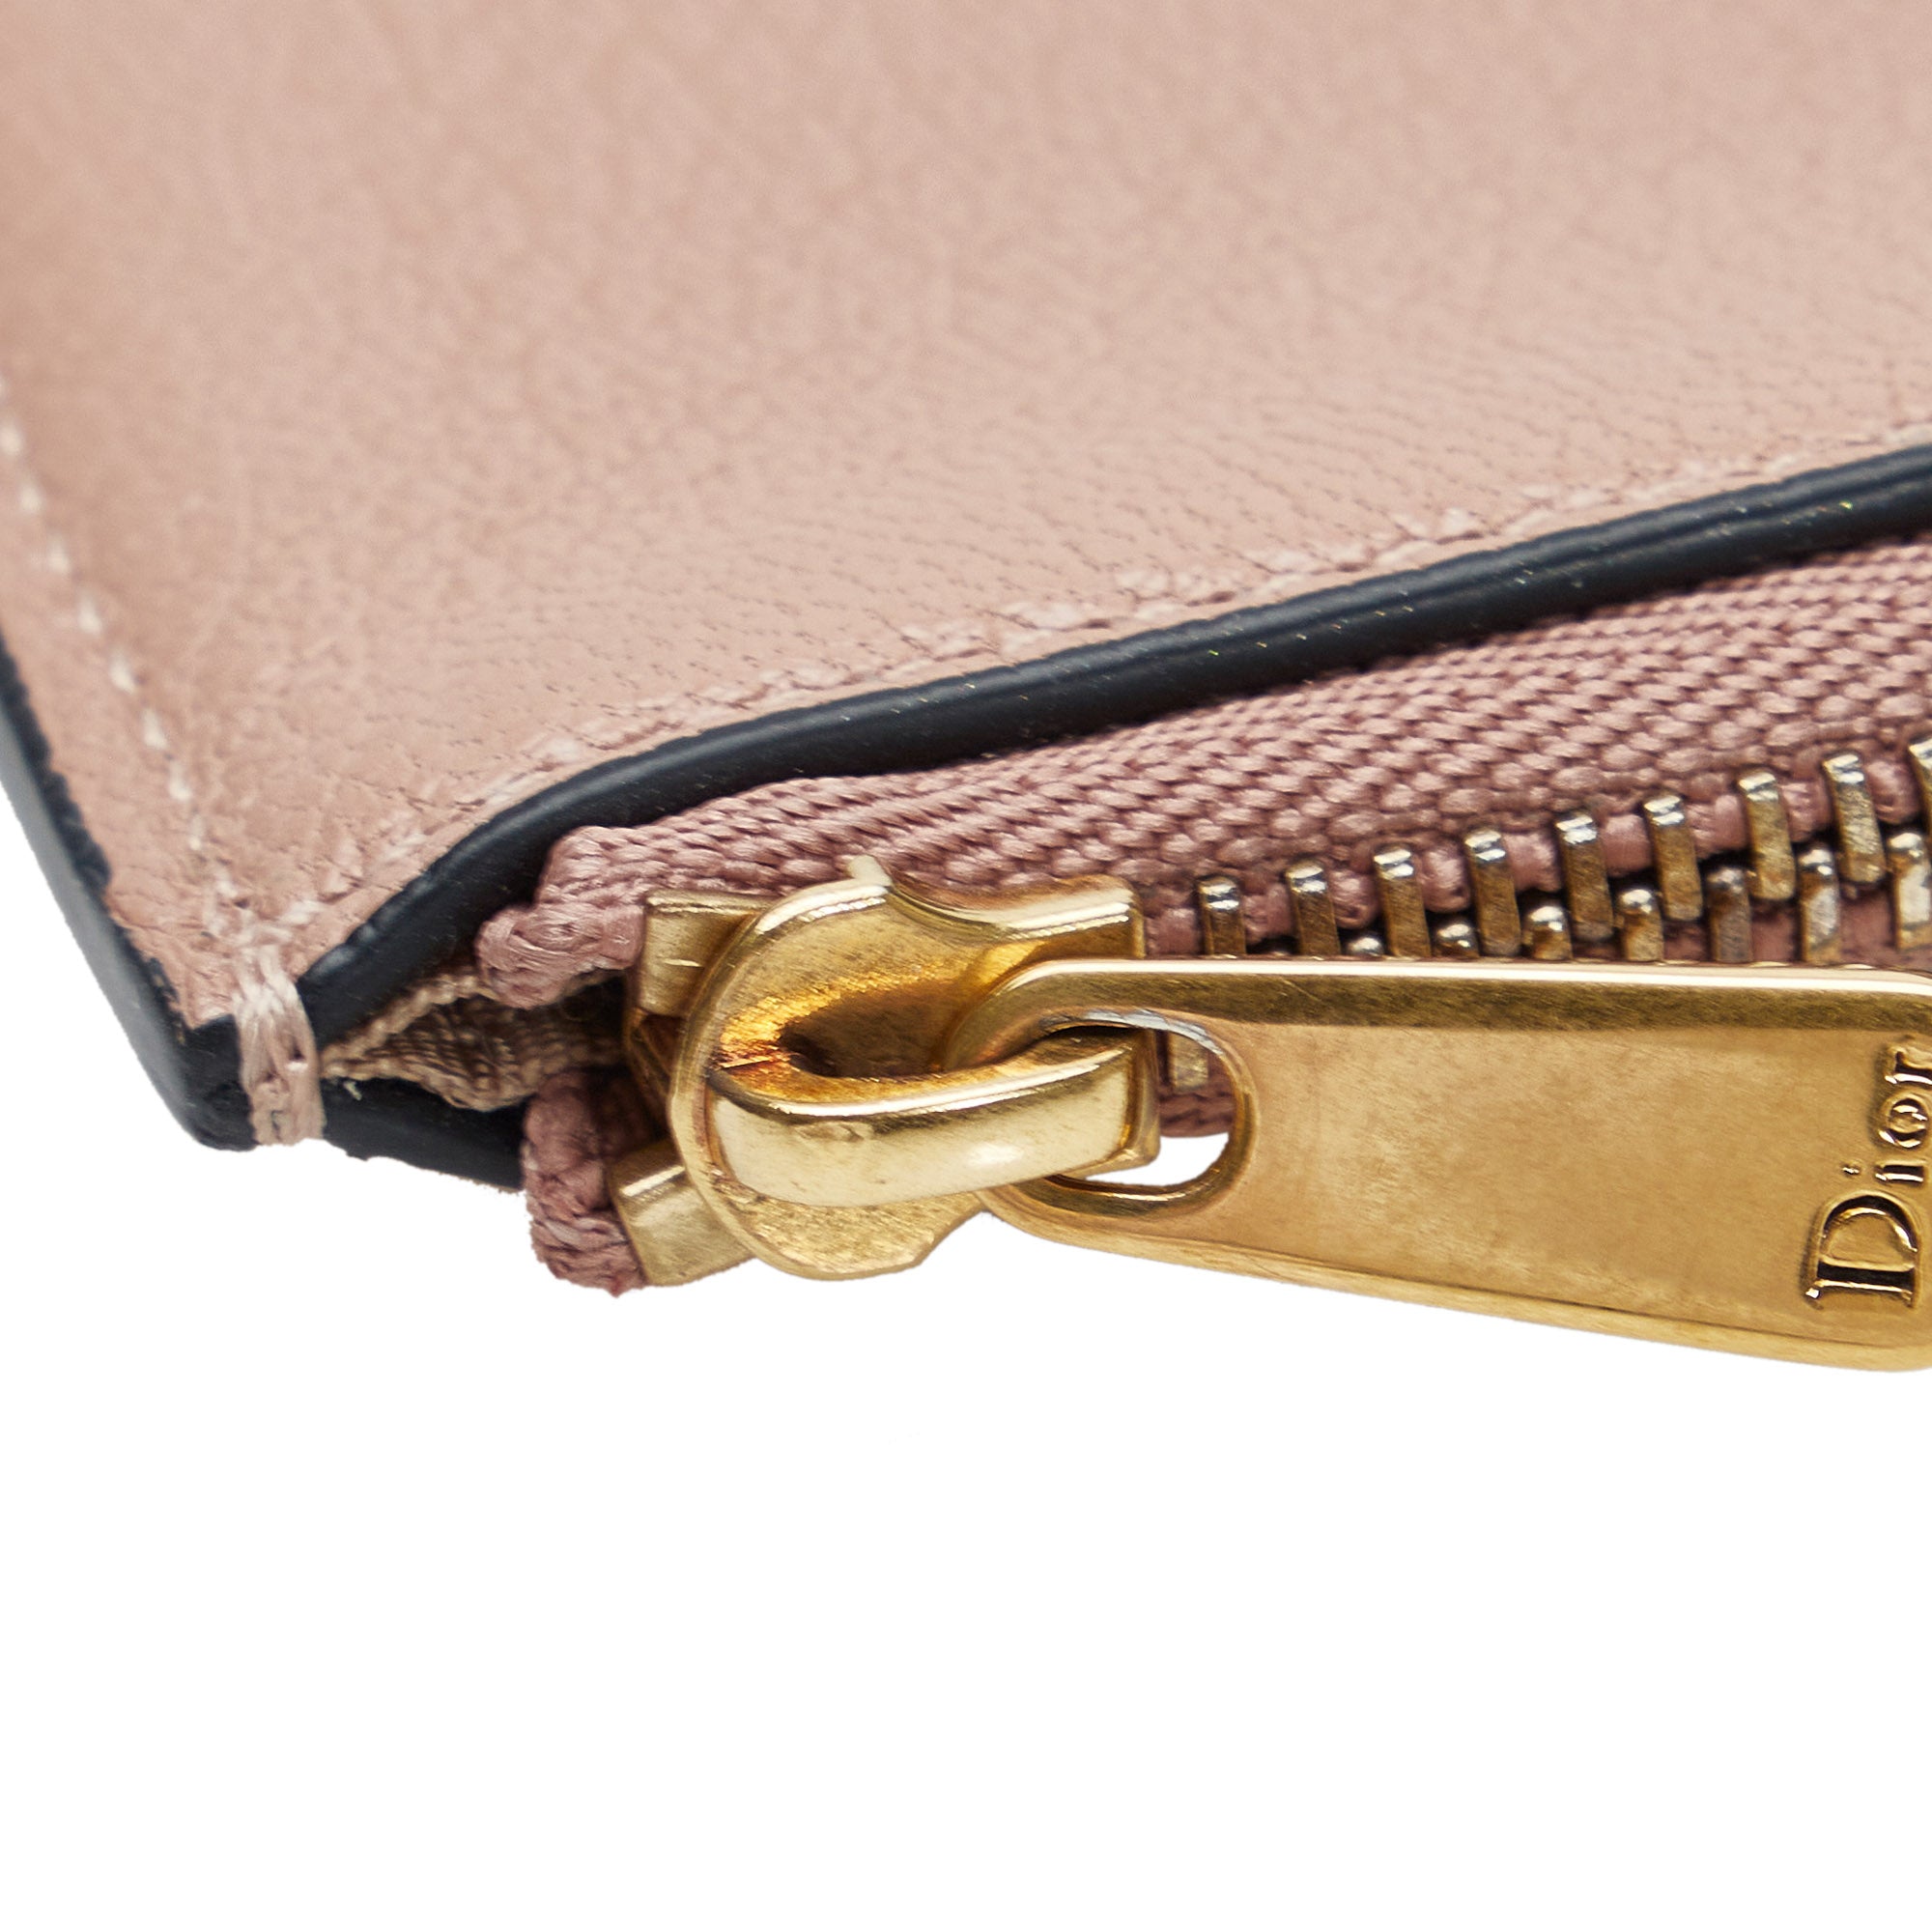 Saddle wallet on chain leather crossbody bag Dior Pink in Leather